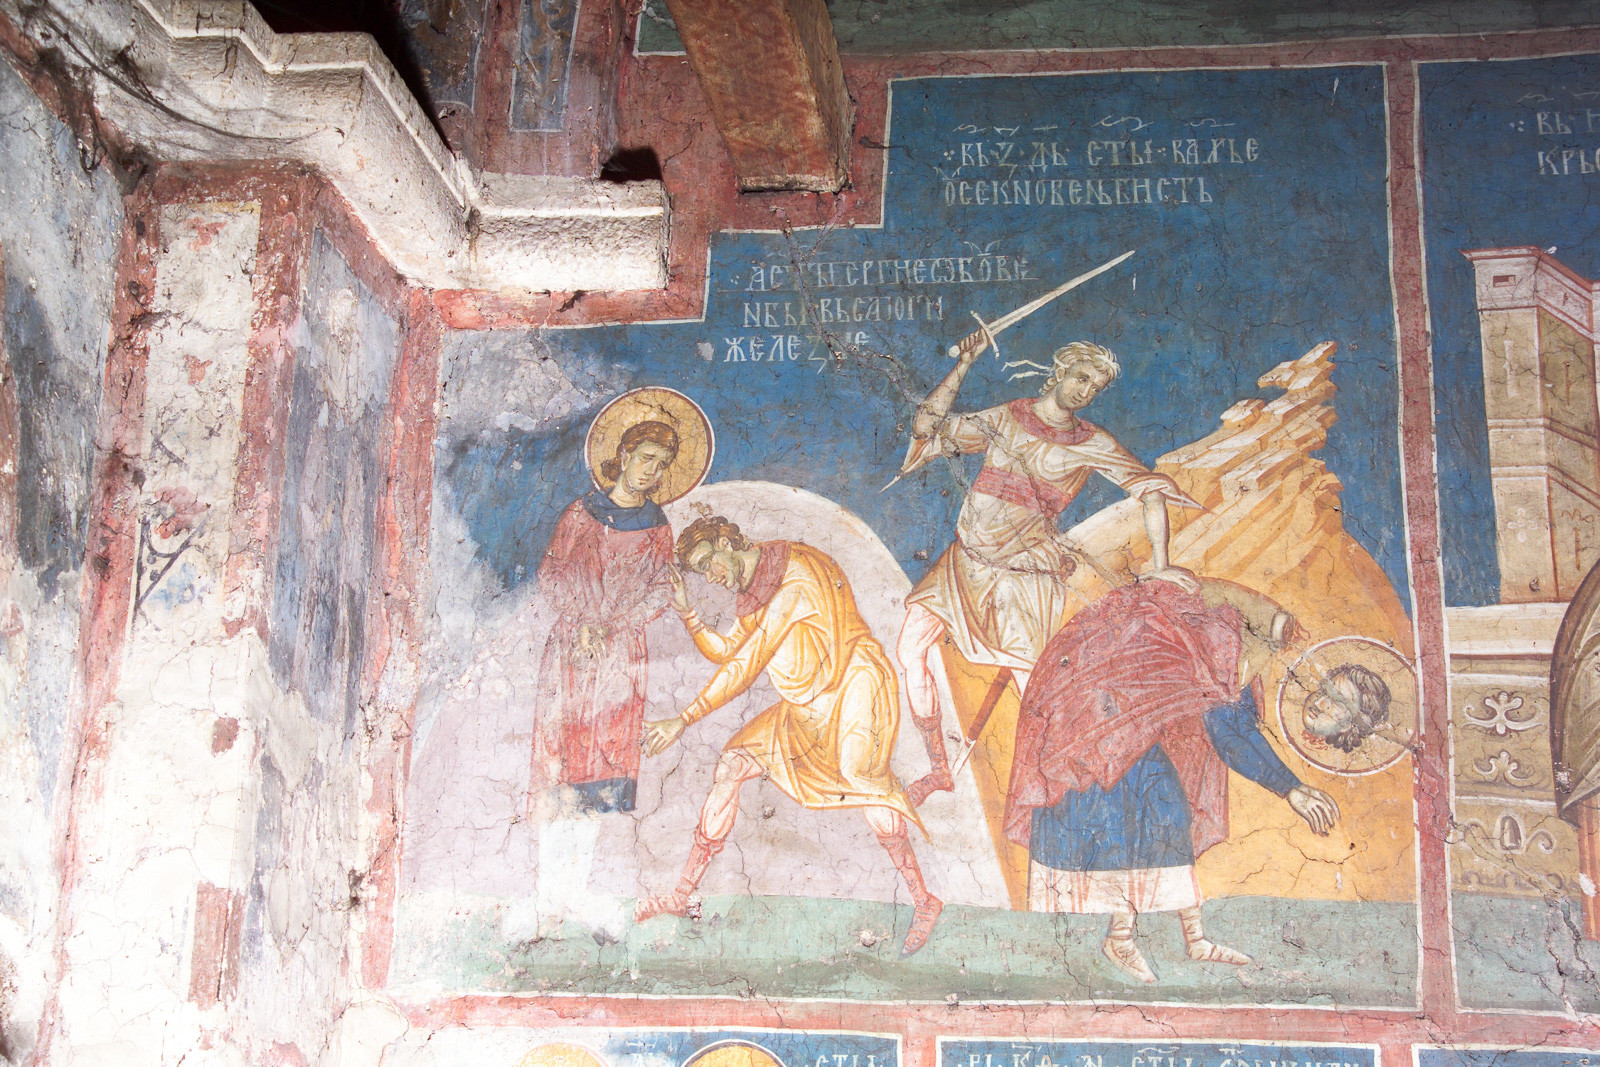 7IV-2 October 7 - Sts. Sergius and Bacchus (scene)